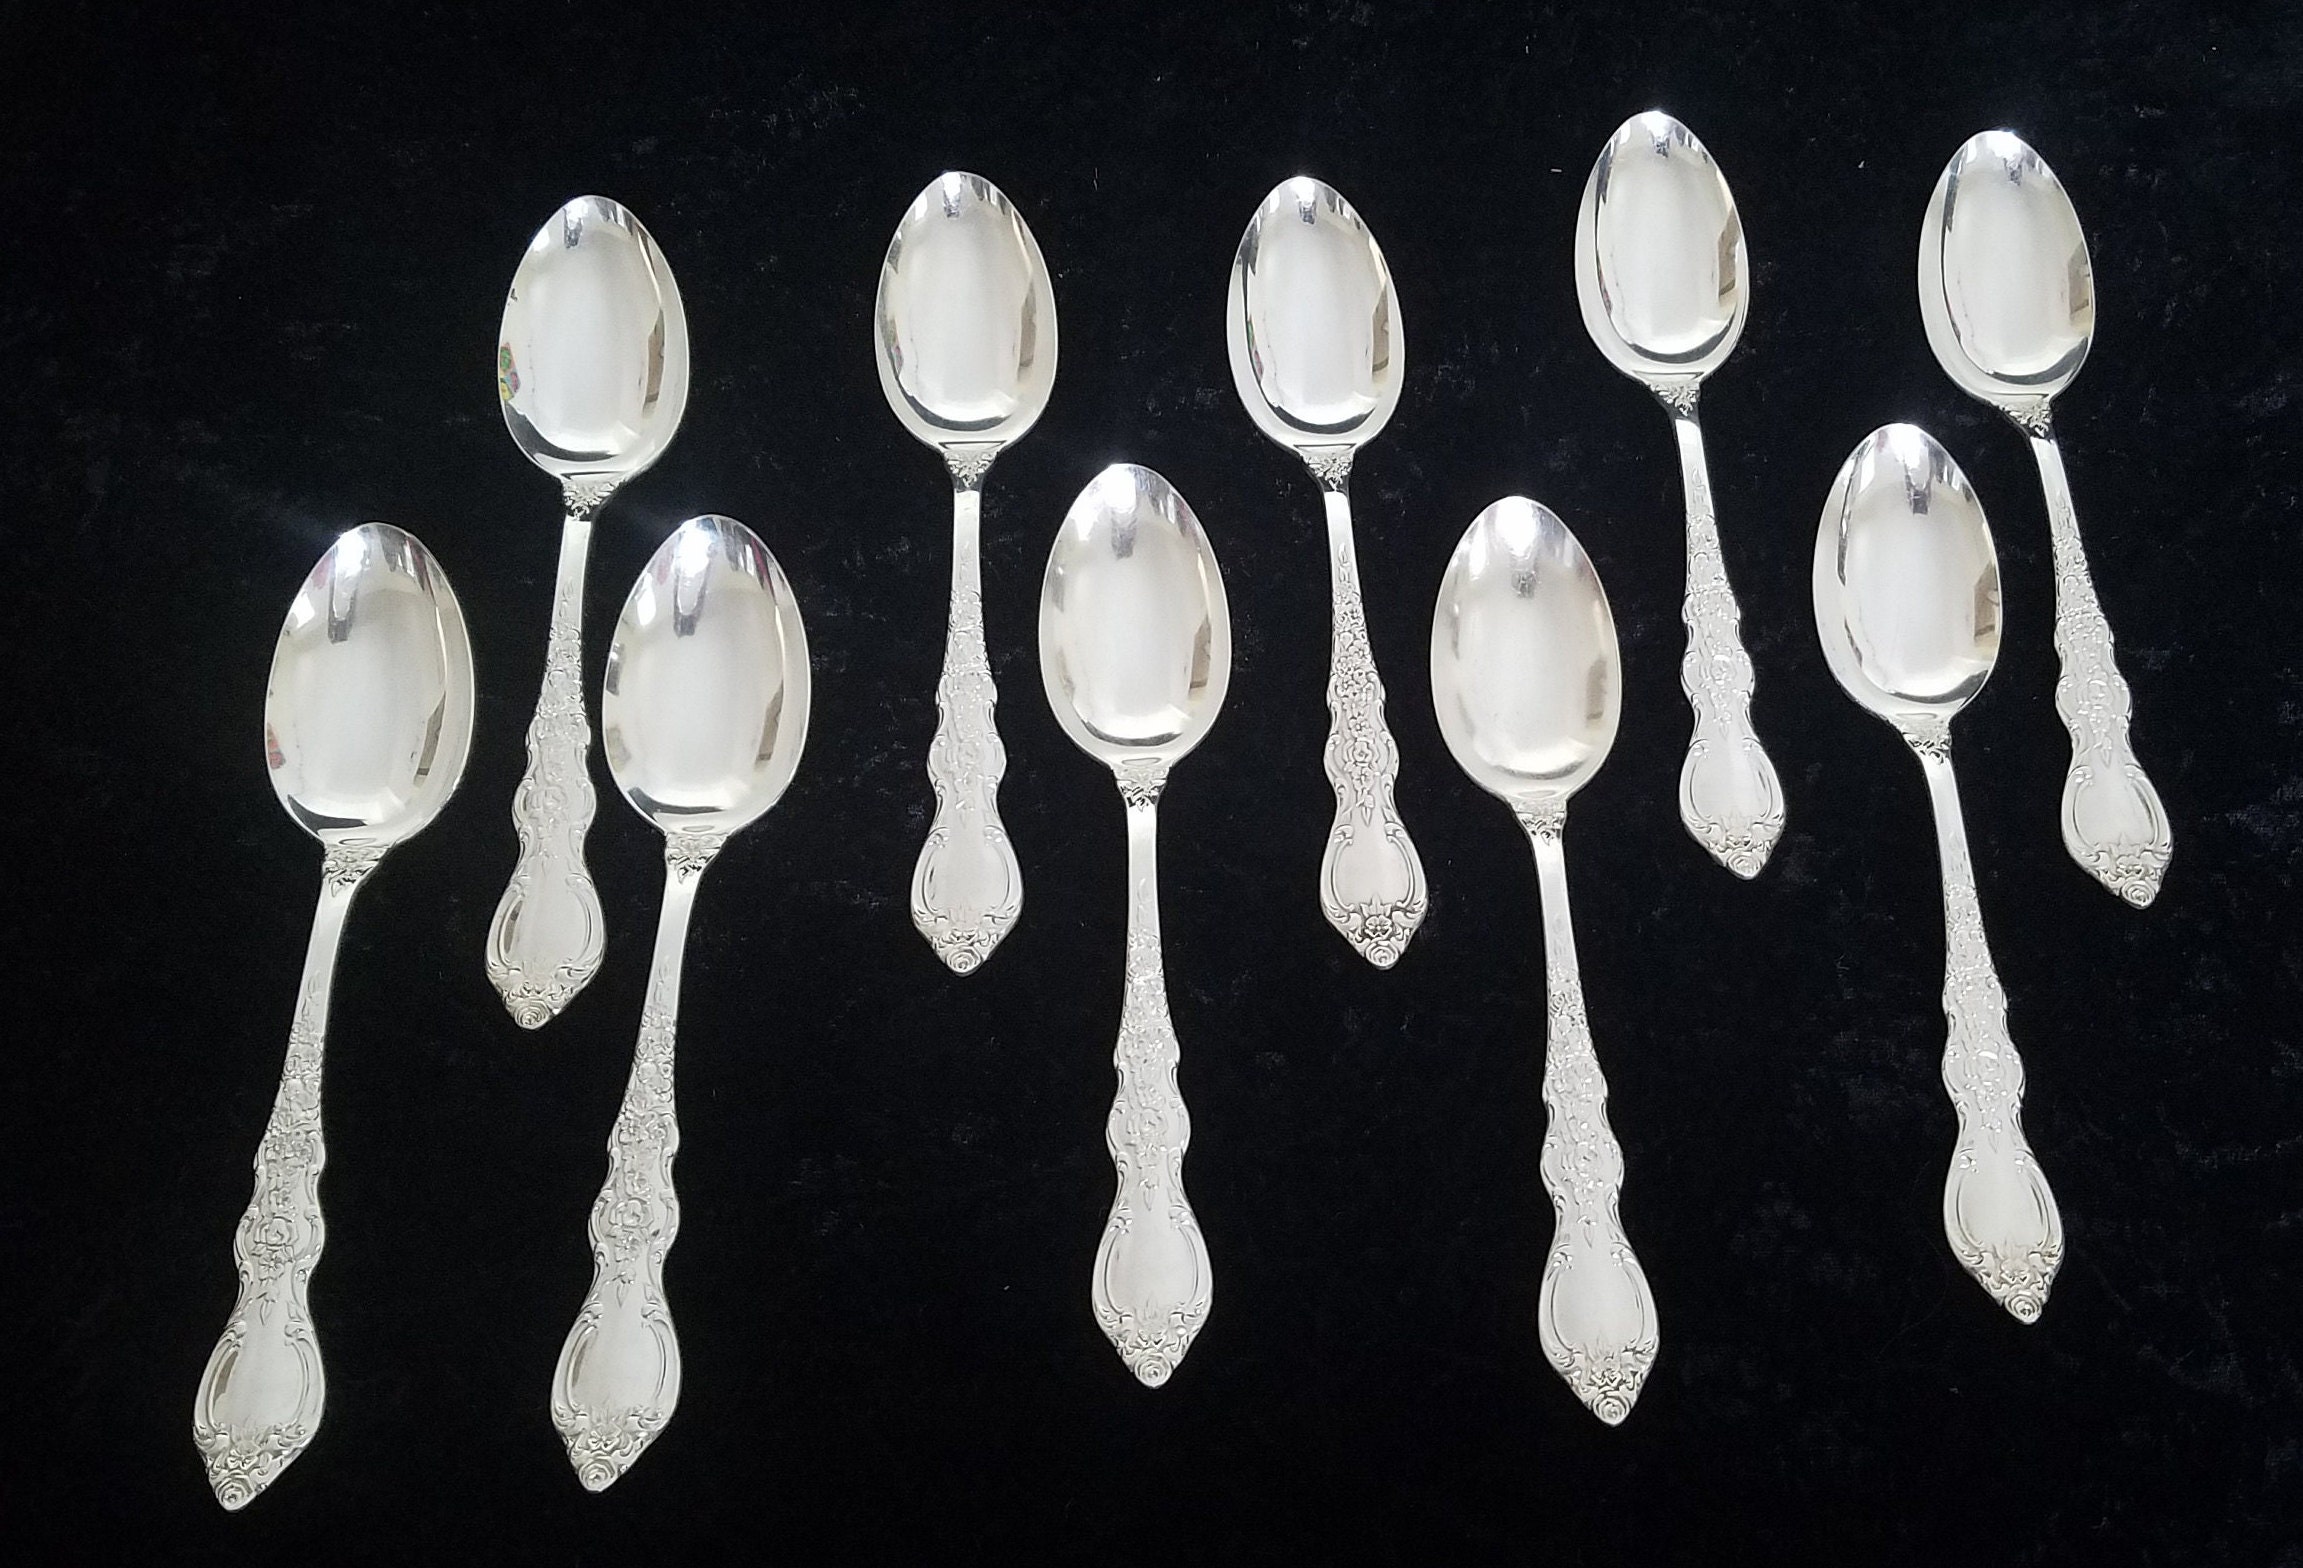 Details about   International Chalfonte Silverplate Your Choice EXC 1969